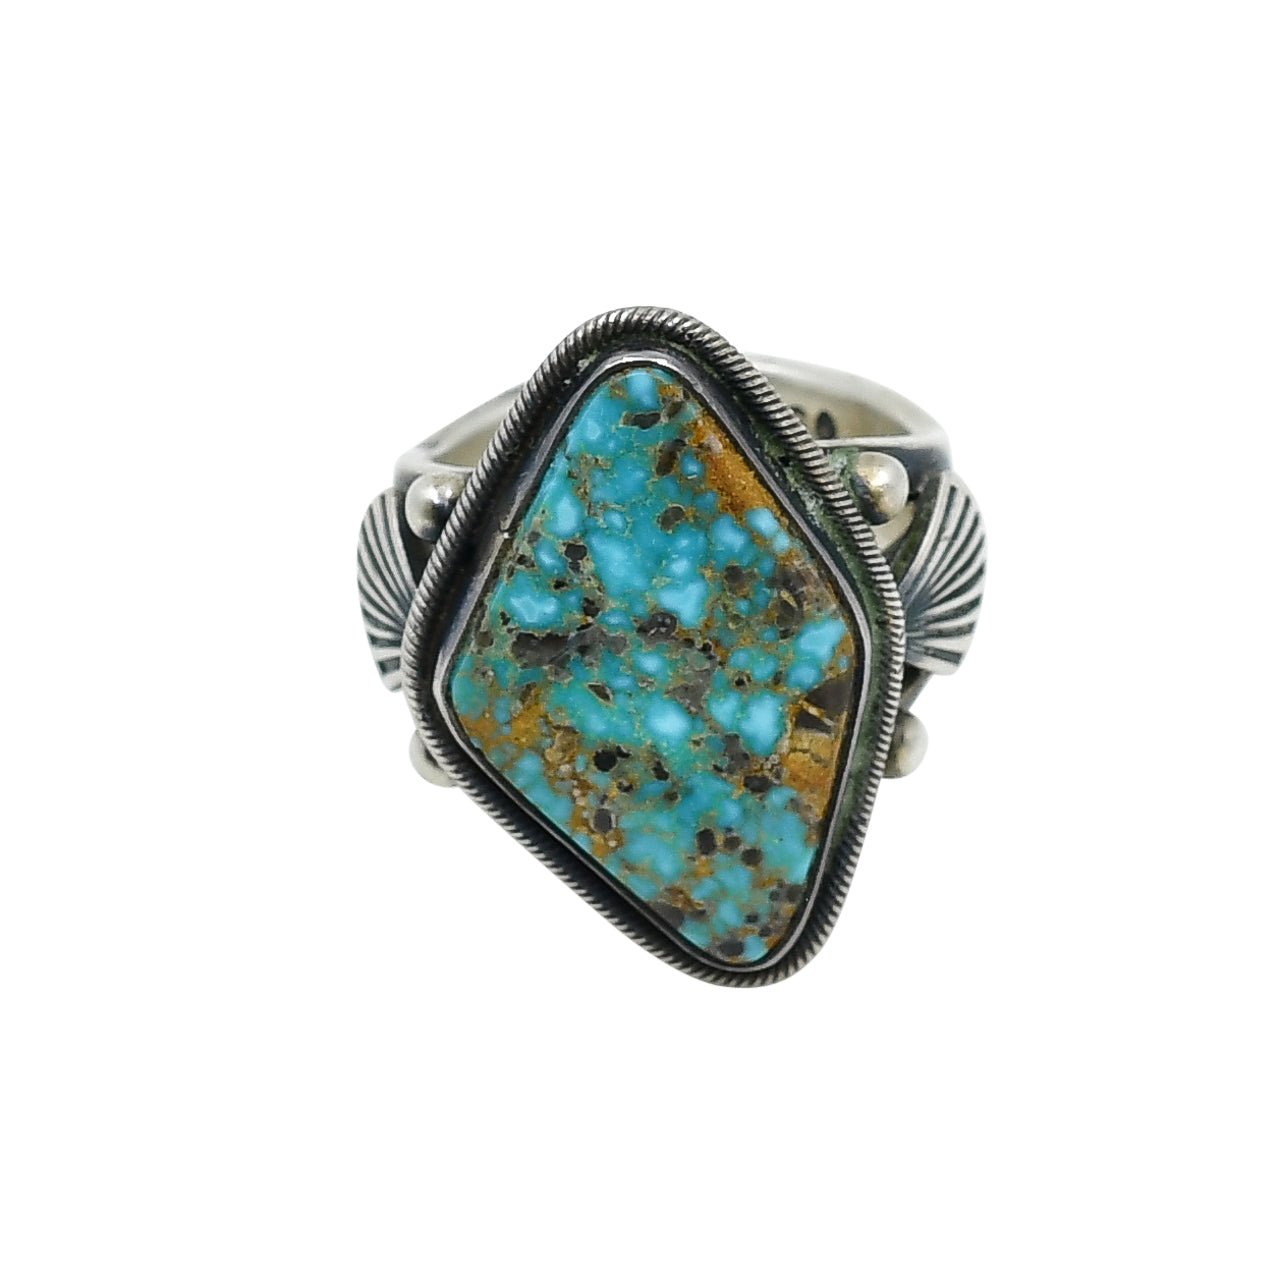 Steve Arviso Ring of Natural Turquoise - Turquoise & Tufa